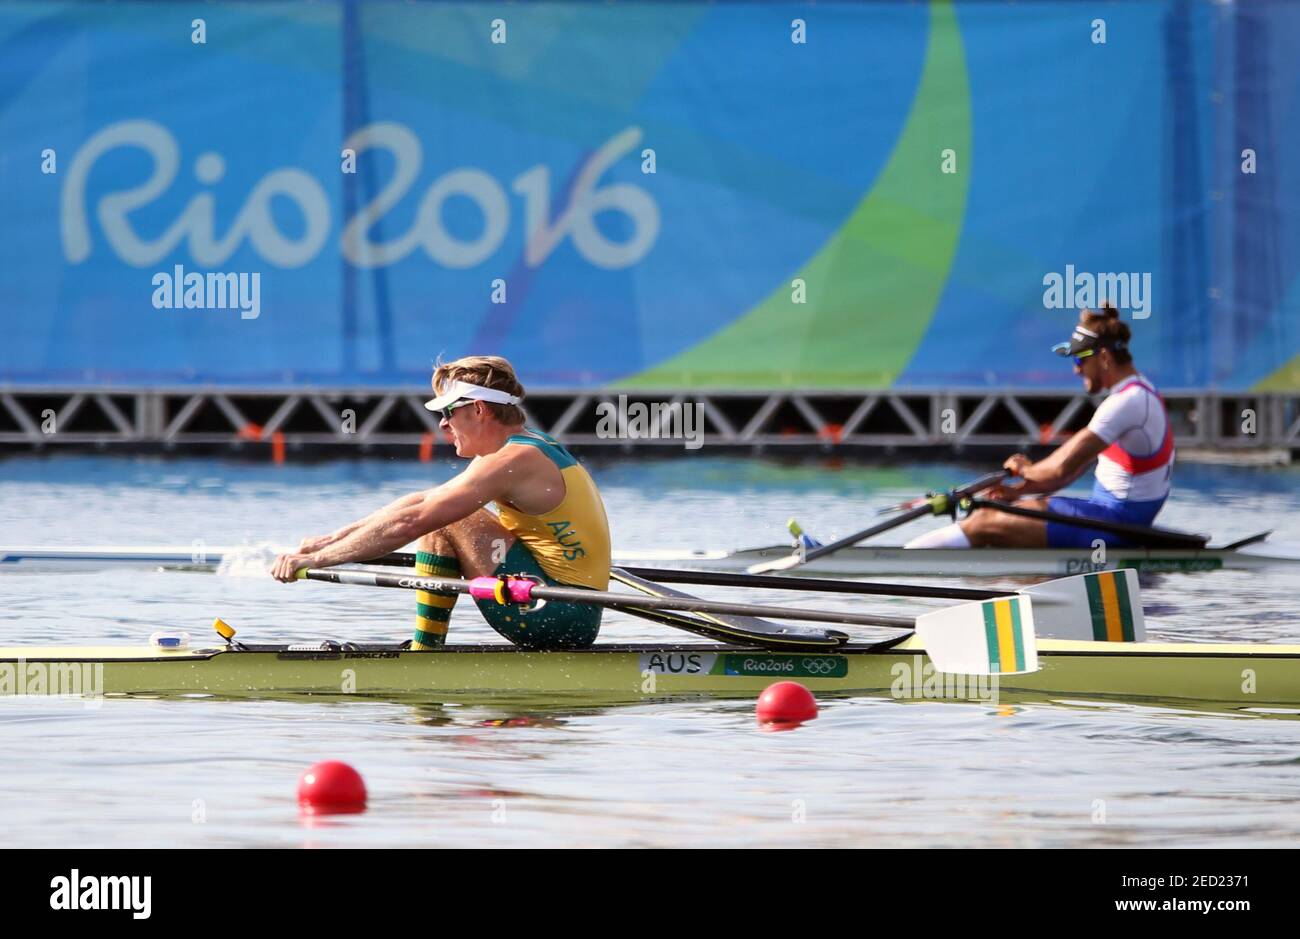 2016 Rio Olympics - Rowing - Preliminary - Men's Single Sculls Heats - Lagoa Stadium - Rio De Janeiro, Brazil - 06/08/2016. Rhys Grant (AUS) of Australia competes. REUTERS/Carlos Barria FOR EDITORIAL USE ONLY. NOT FOR SALE FOR MARKETING OR ADVERTISING CAMPAIGNS.   Picture Supplied by Action Images Stock Photo